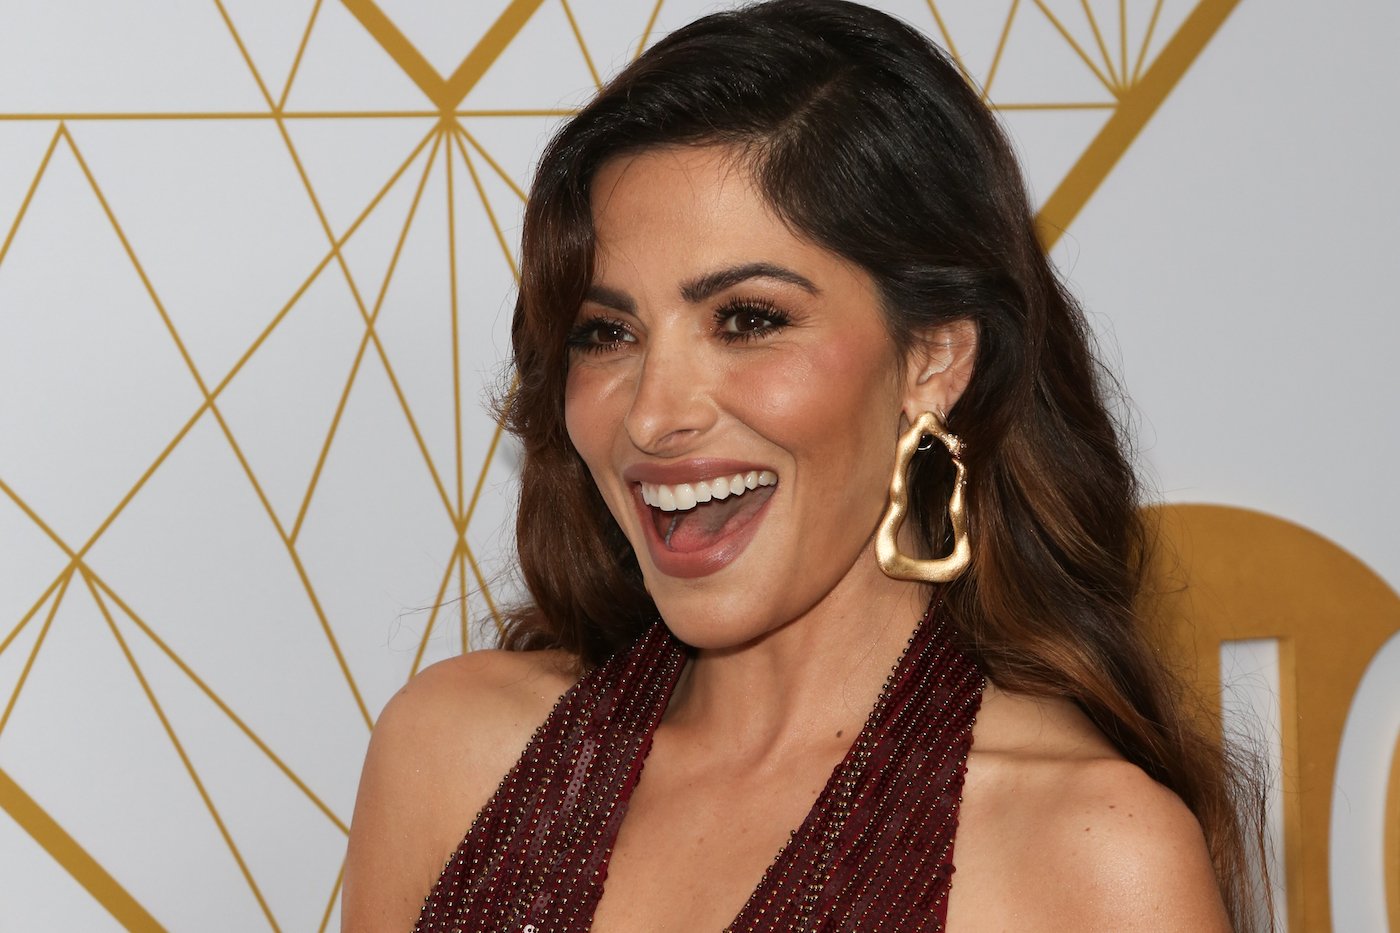 Sarah Shahi attends the Showtime Emmy eve nominees celebrations at San Vincente Bungalows in September 2019 in West Hollywood, California